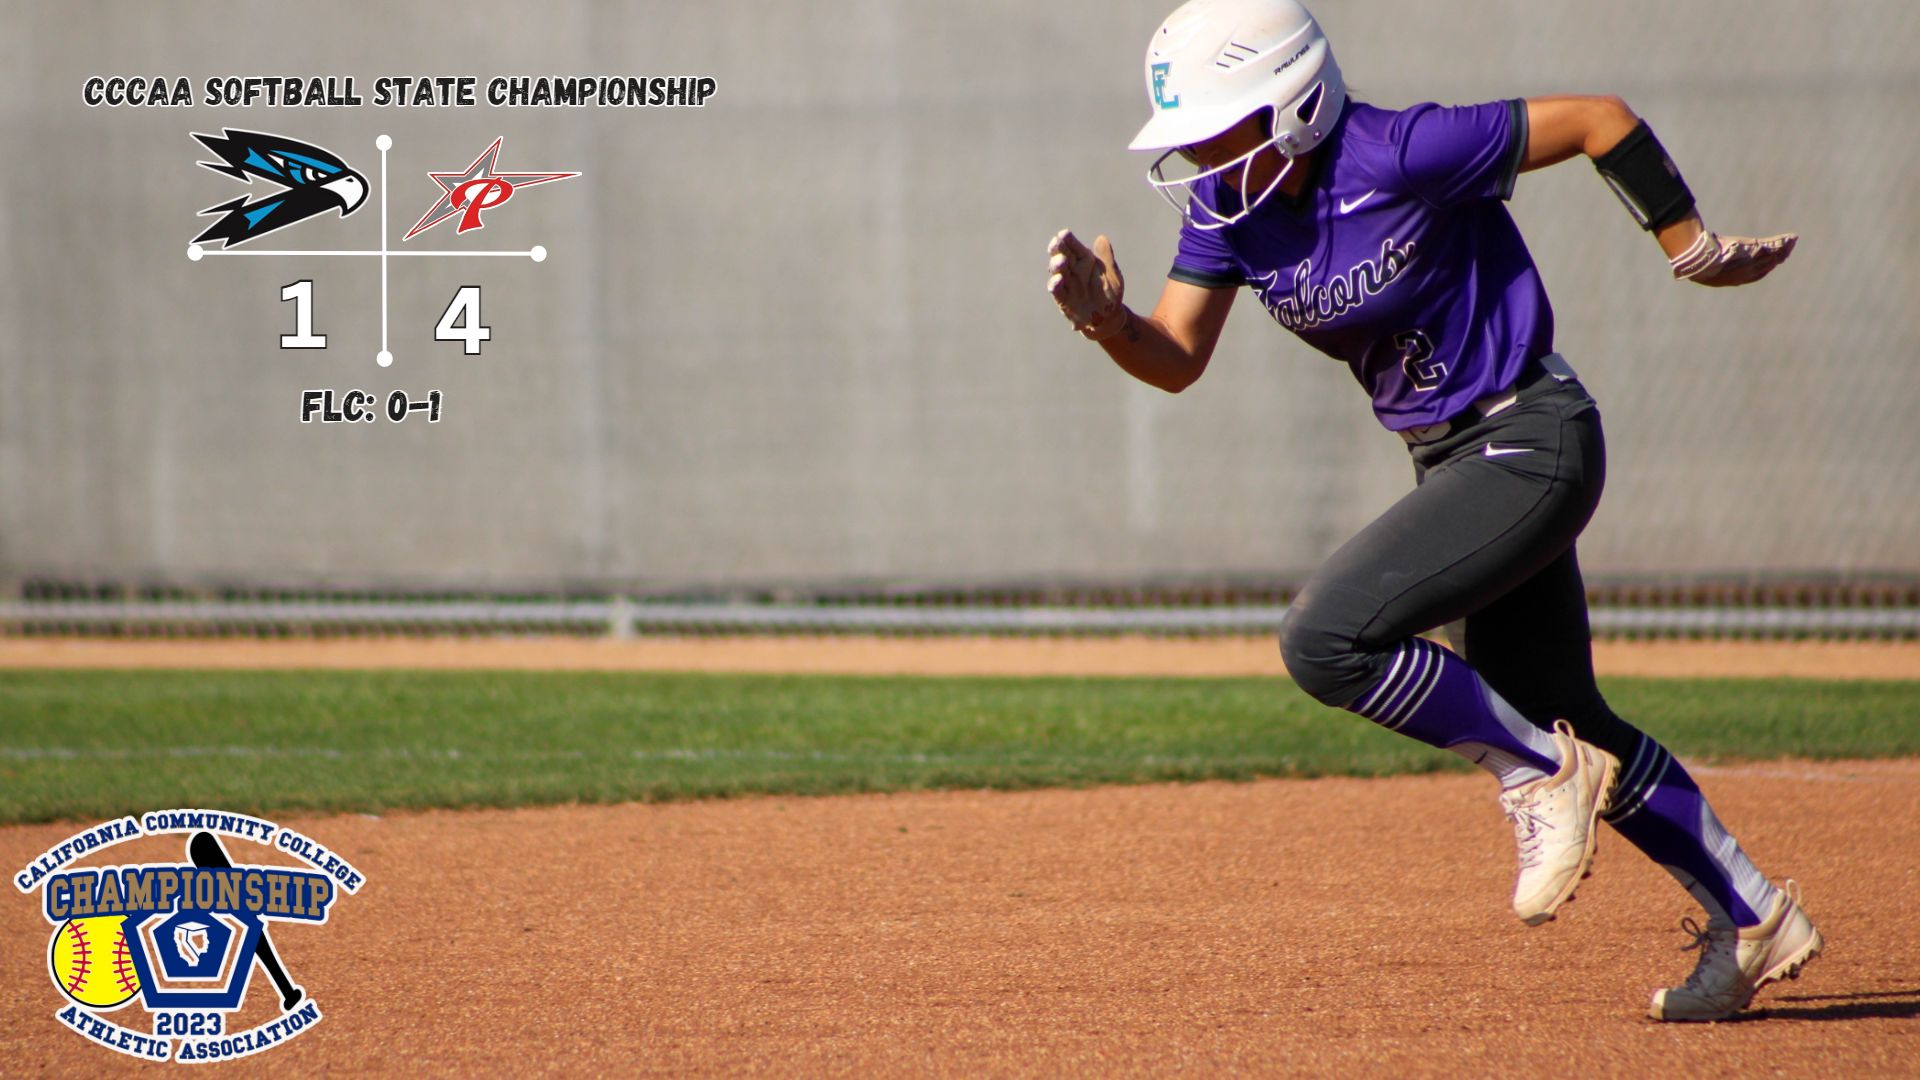 Falcons Lose to Palomar in CCCAA Softball State Championship